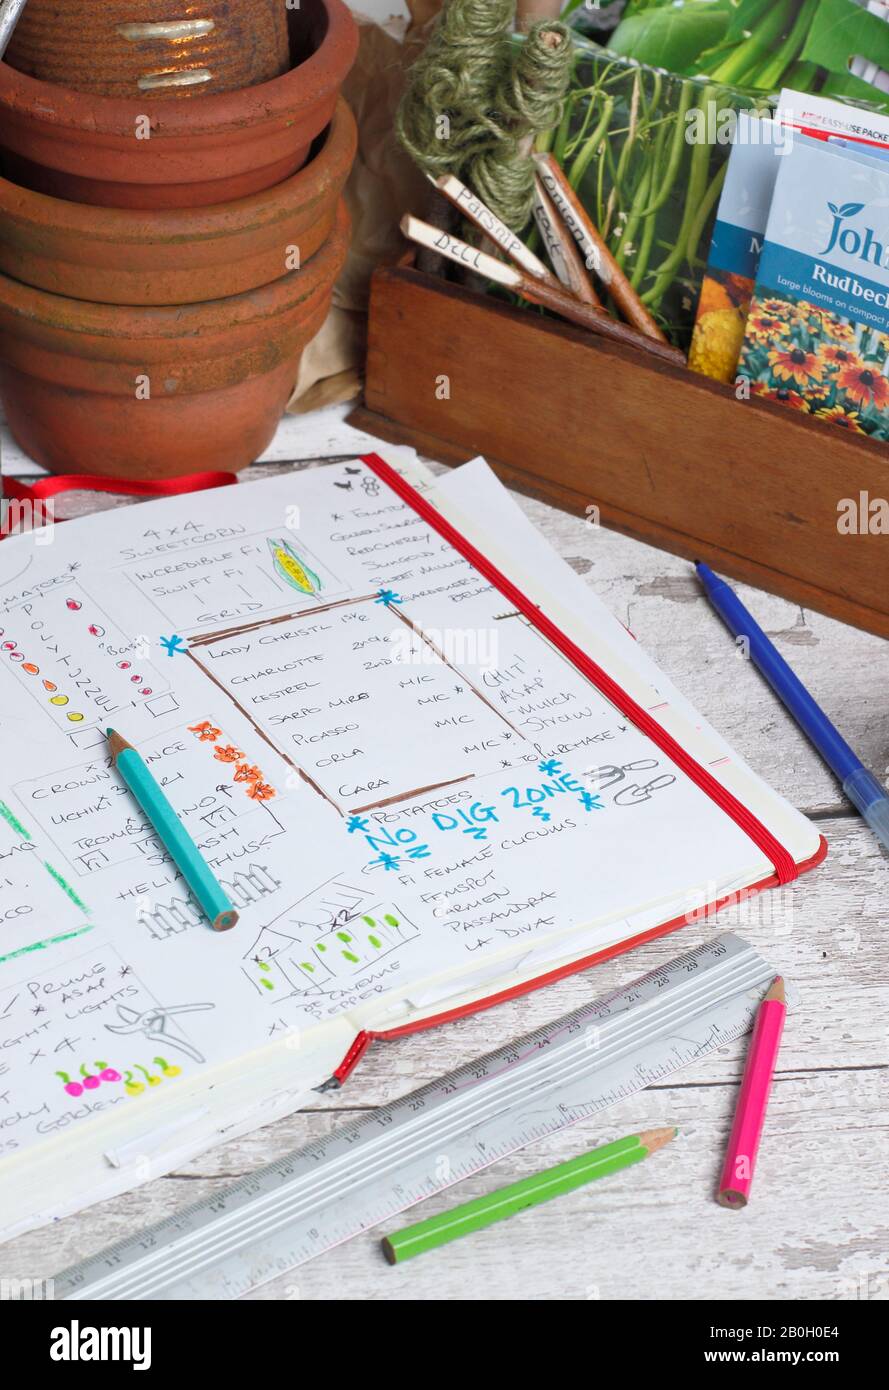 Planning a vegetable garden in late winter with a gardening notebook and seed packets. UK Stock Photo